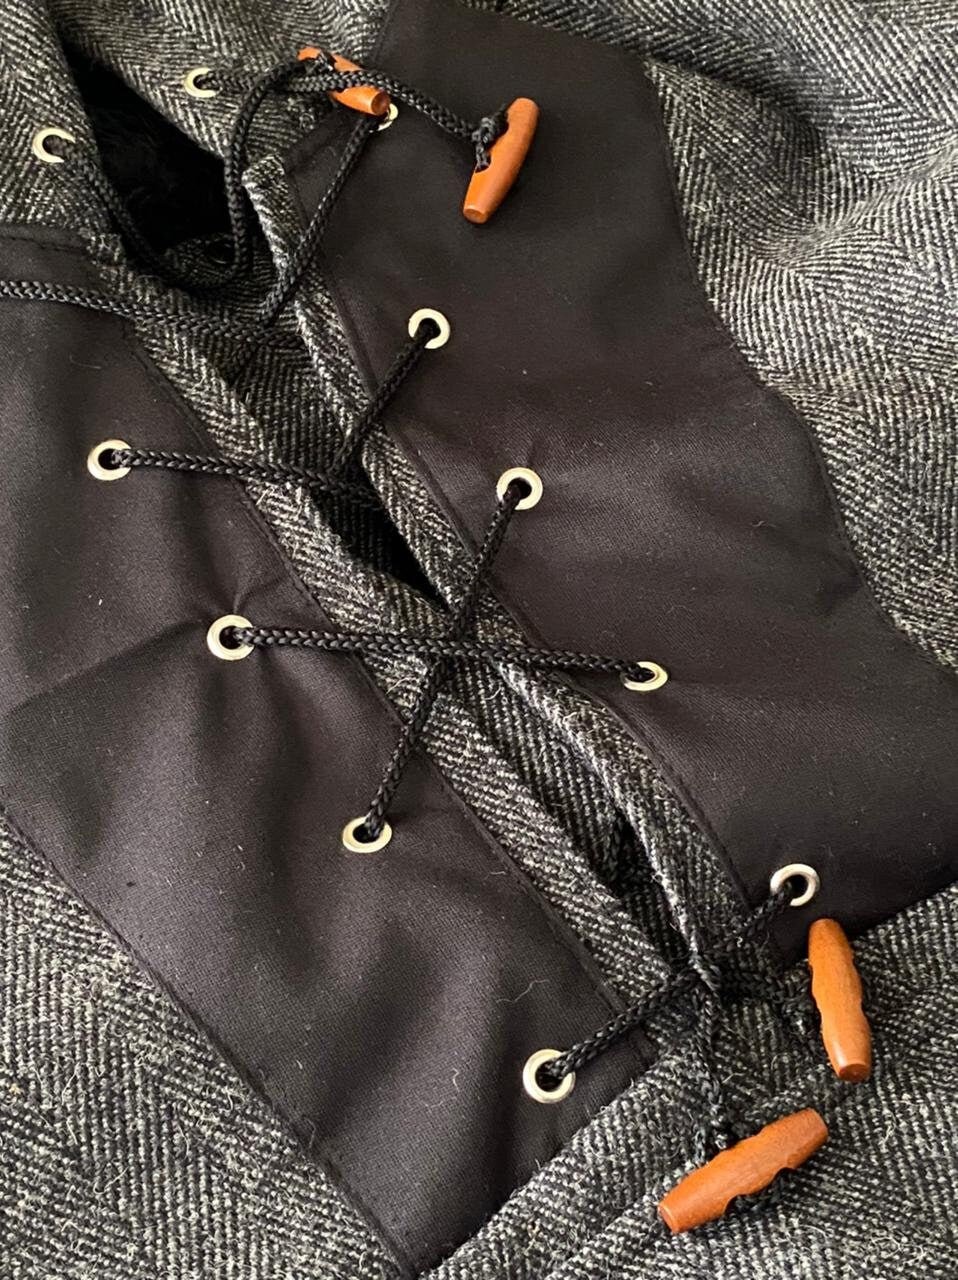 New colour released with Lines Mouflon Bushcraft Anorak, You will be ready for adventure, Best Protection For Cold, Full Handmade  99percenthandmade   